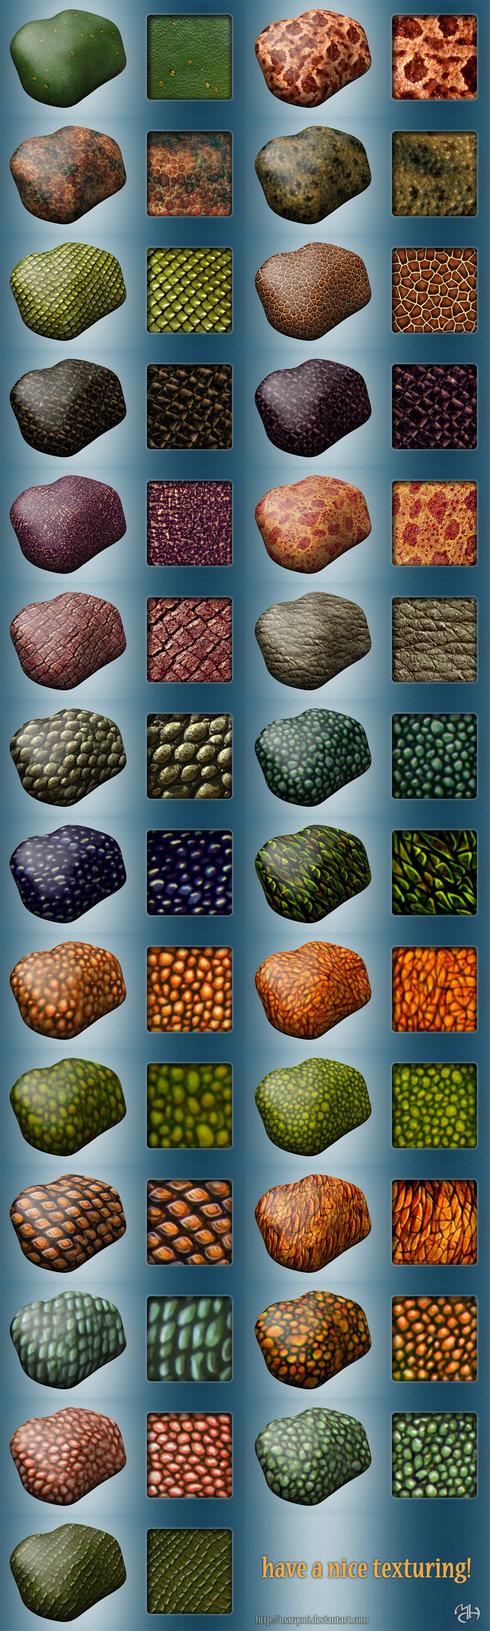 Dragons textures for sculptris by Marqoni photoshop resource collected by psd-dude.com from deviantart